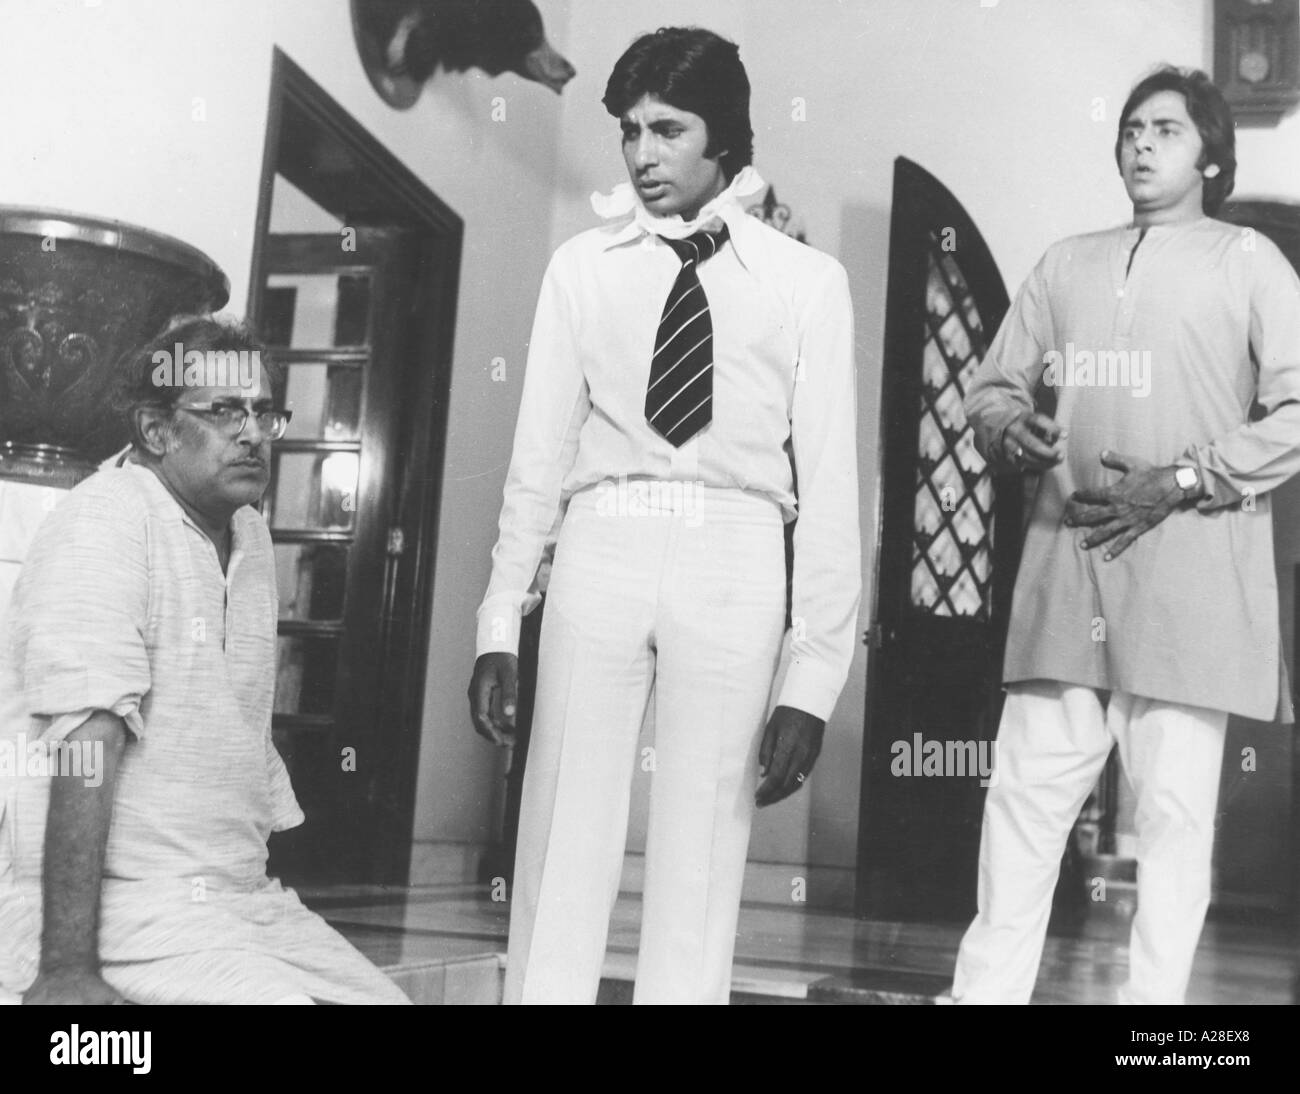 Indian Bollywood film star actor Amitabh Bachchan with Director Hrishikesh Mukherjee and actor Vinod Mehra India Stock Photo